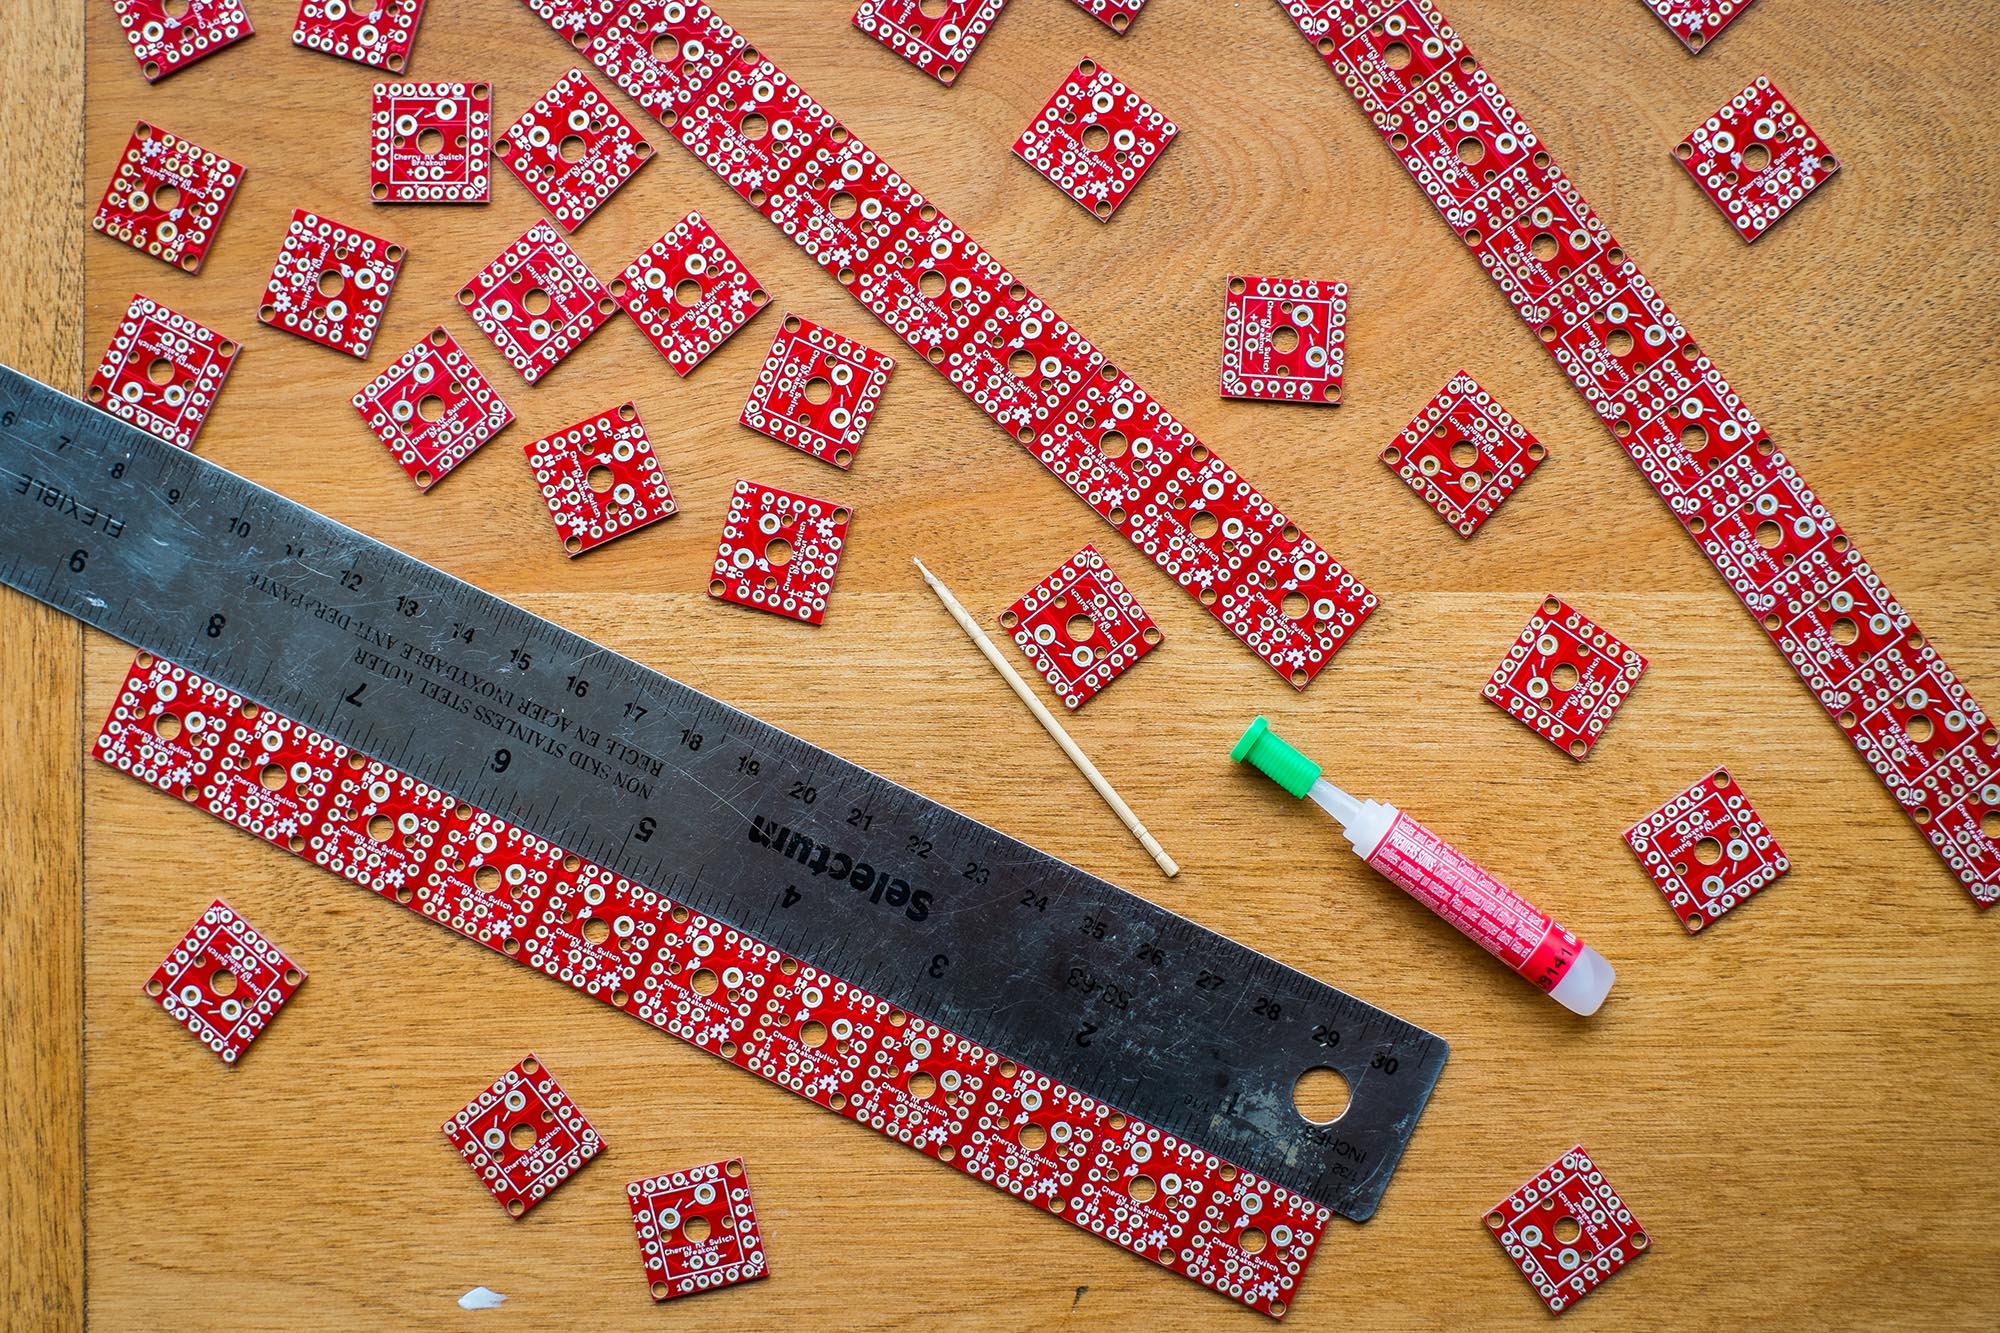 Tiny individual key PCB&#39;s scattered on a desk with ruler to make them straight and glue to connect them